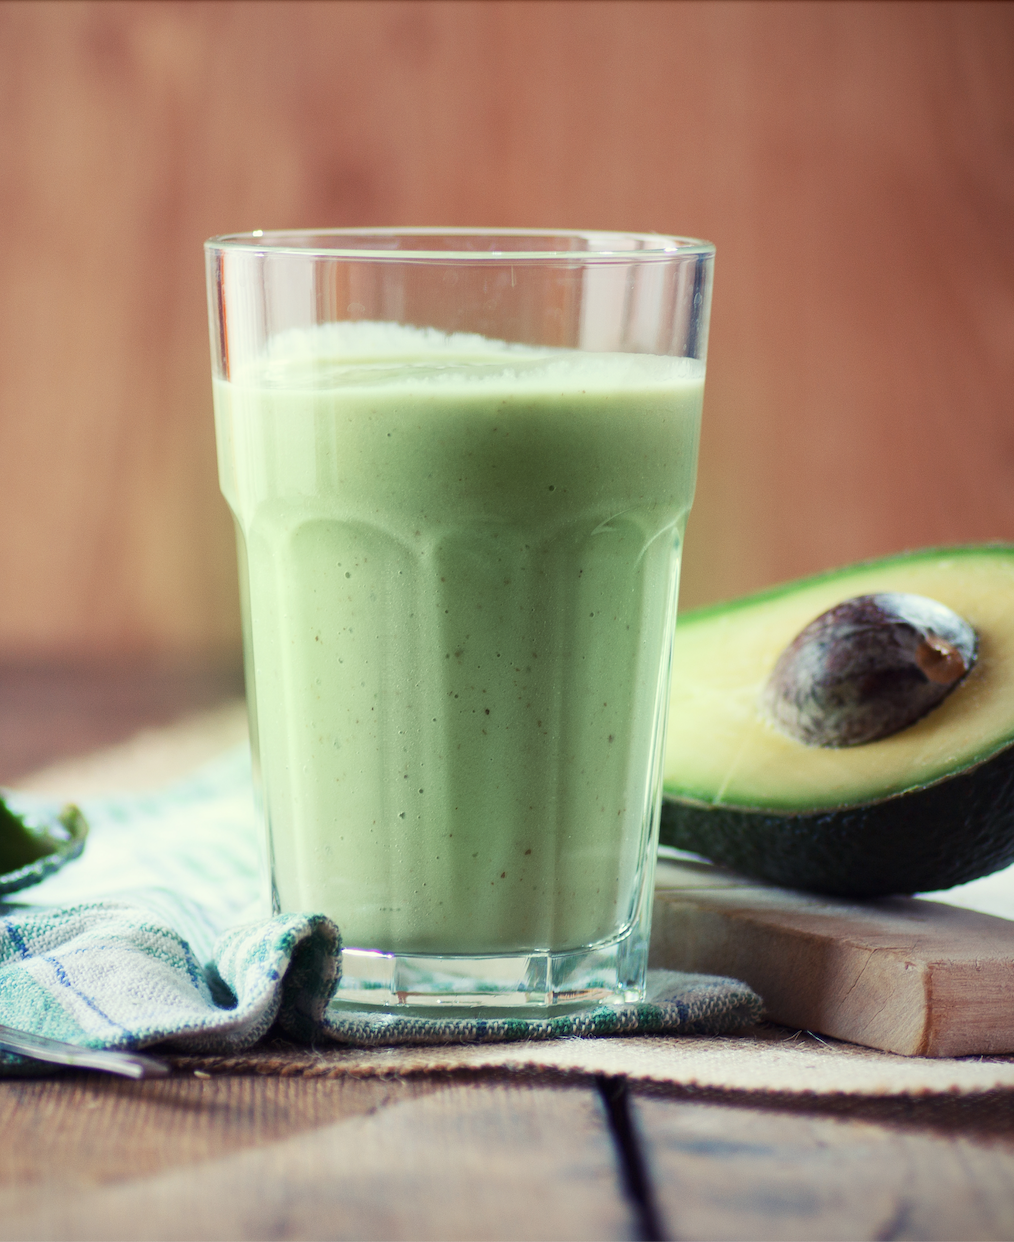 Supercharge Your Morning With Tribe’s Super Healthy CBD Avocado Smoothie